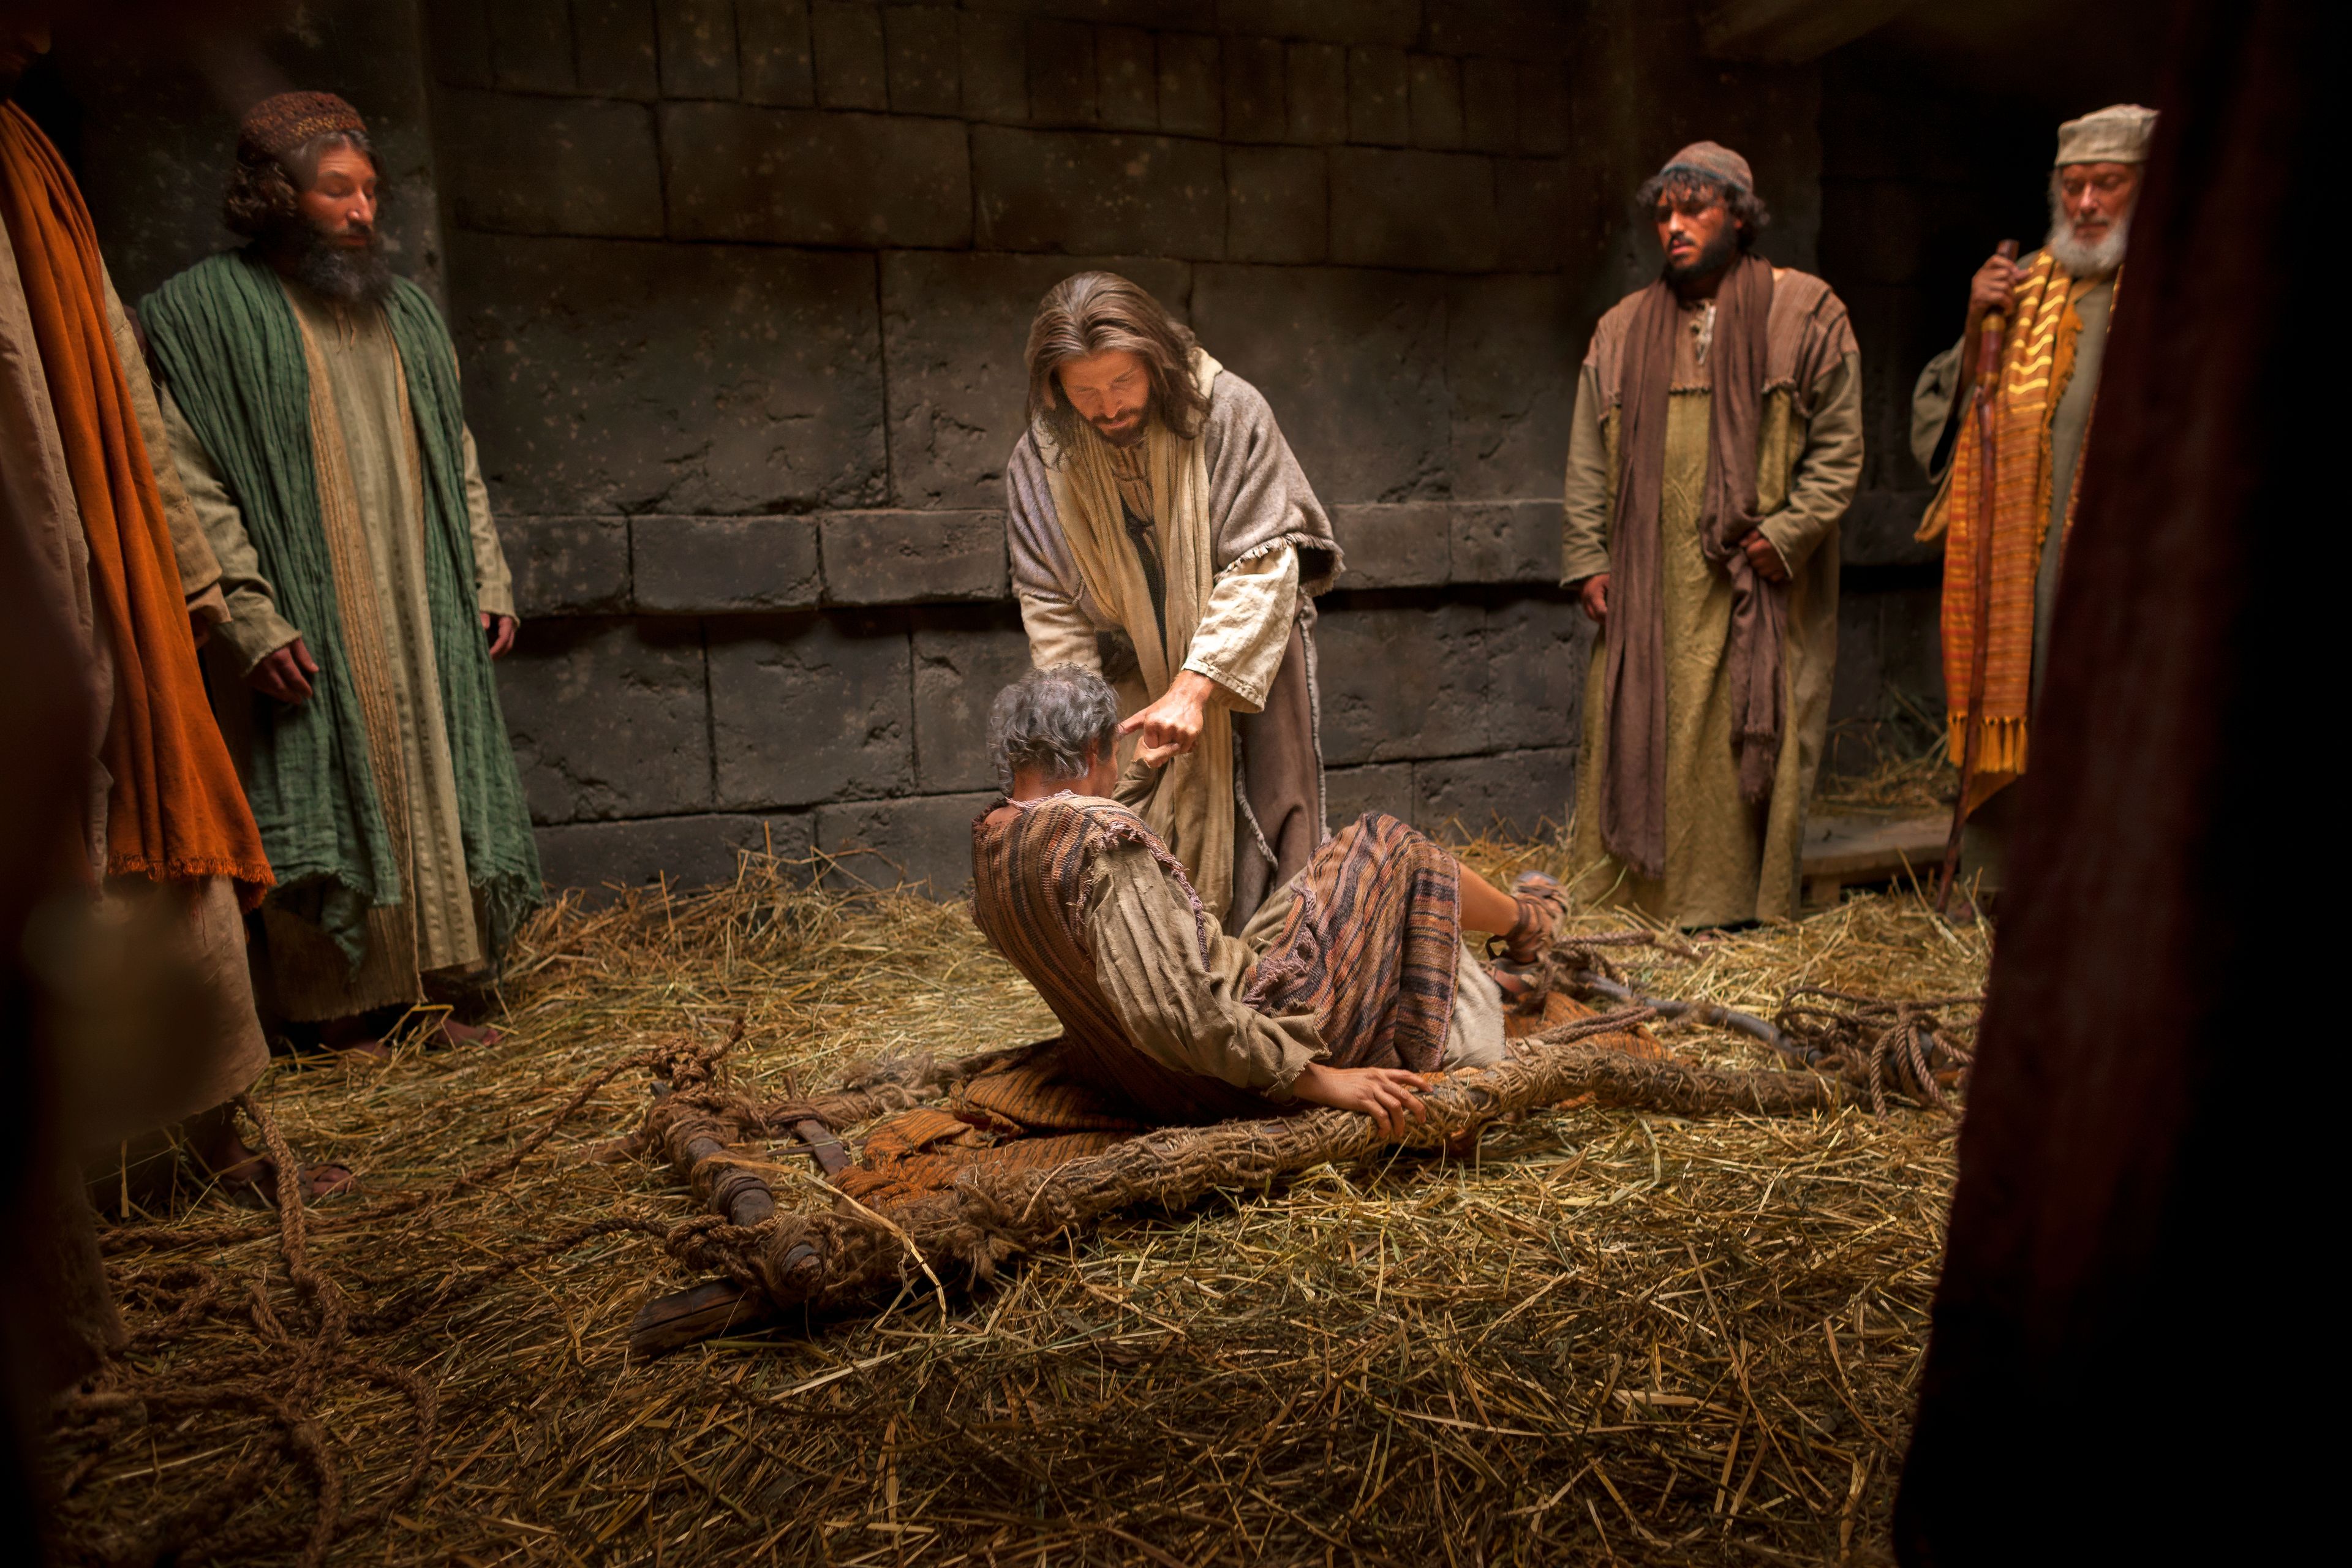 Christ healing a man with palsy.